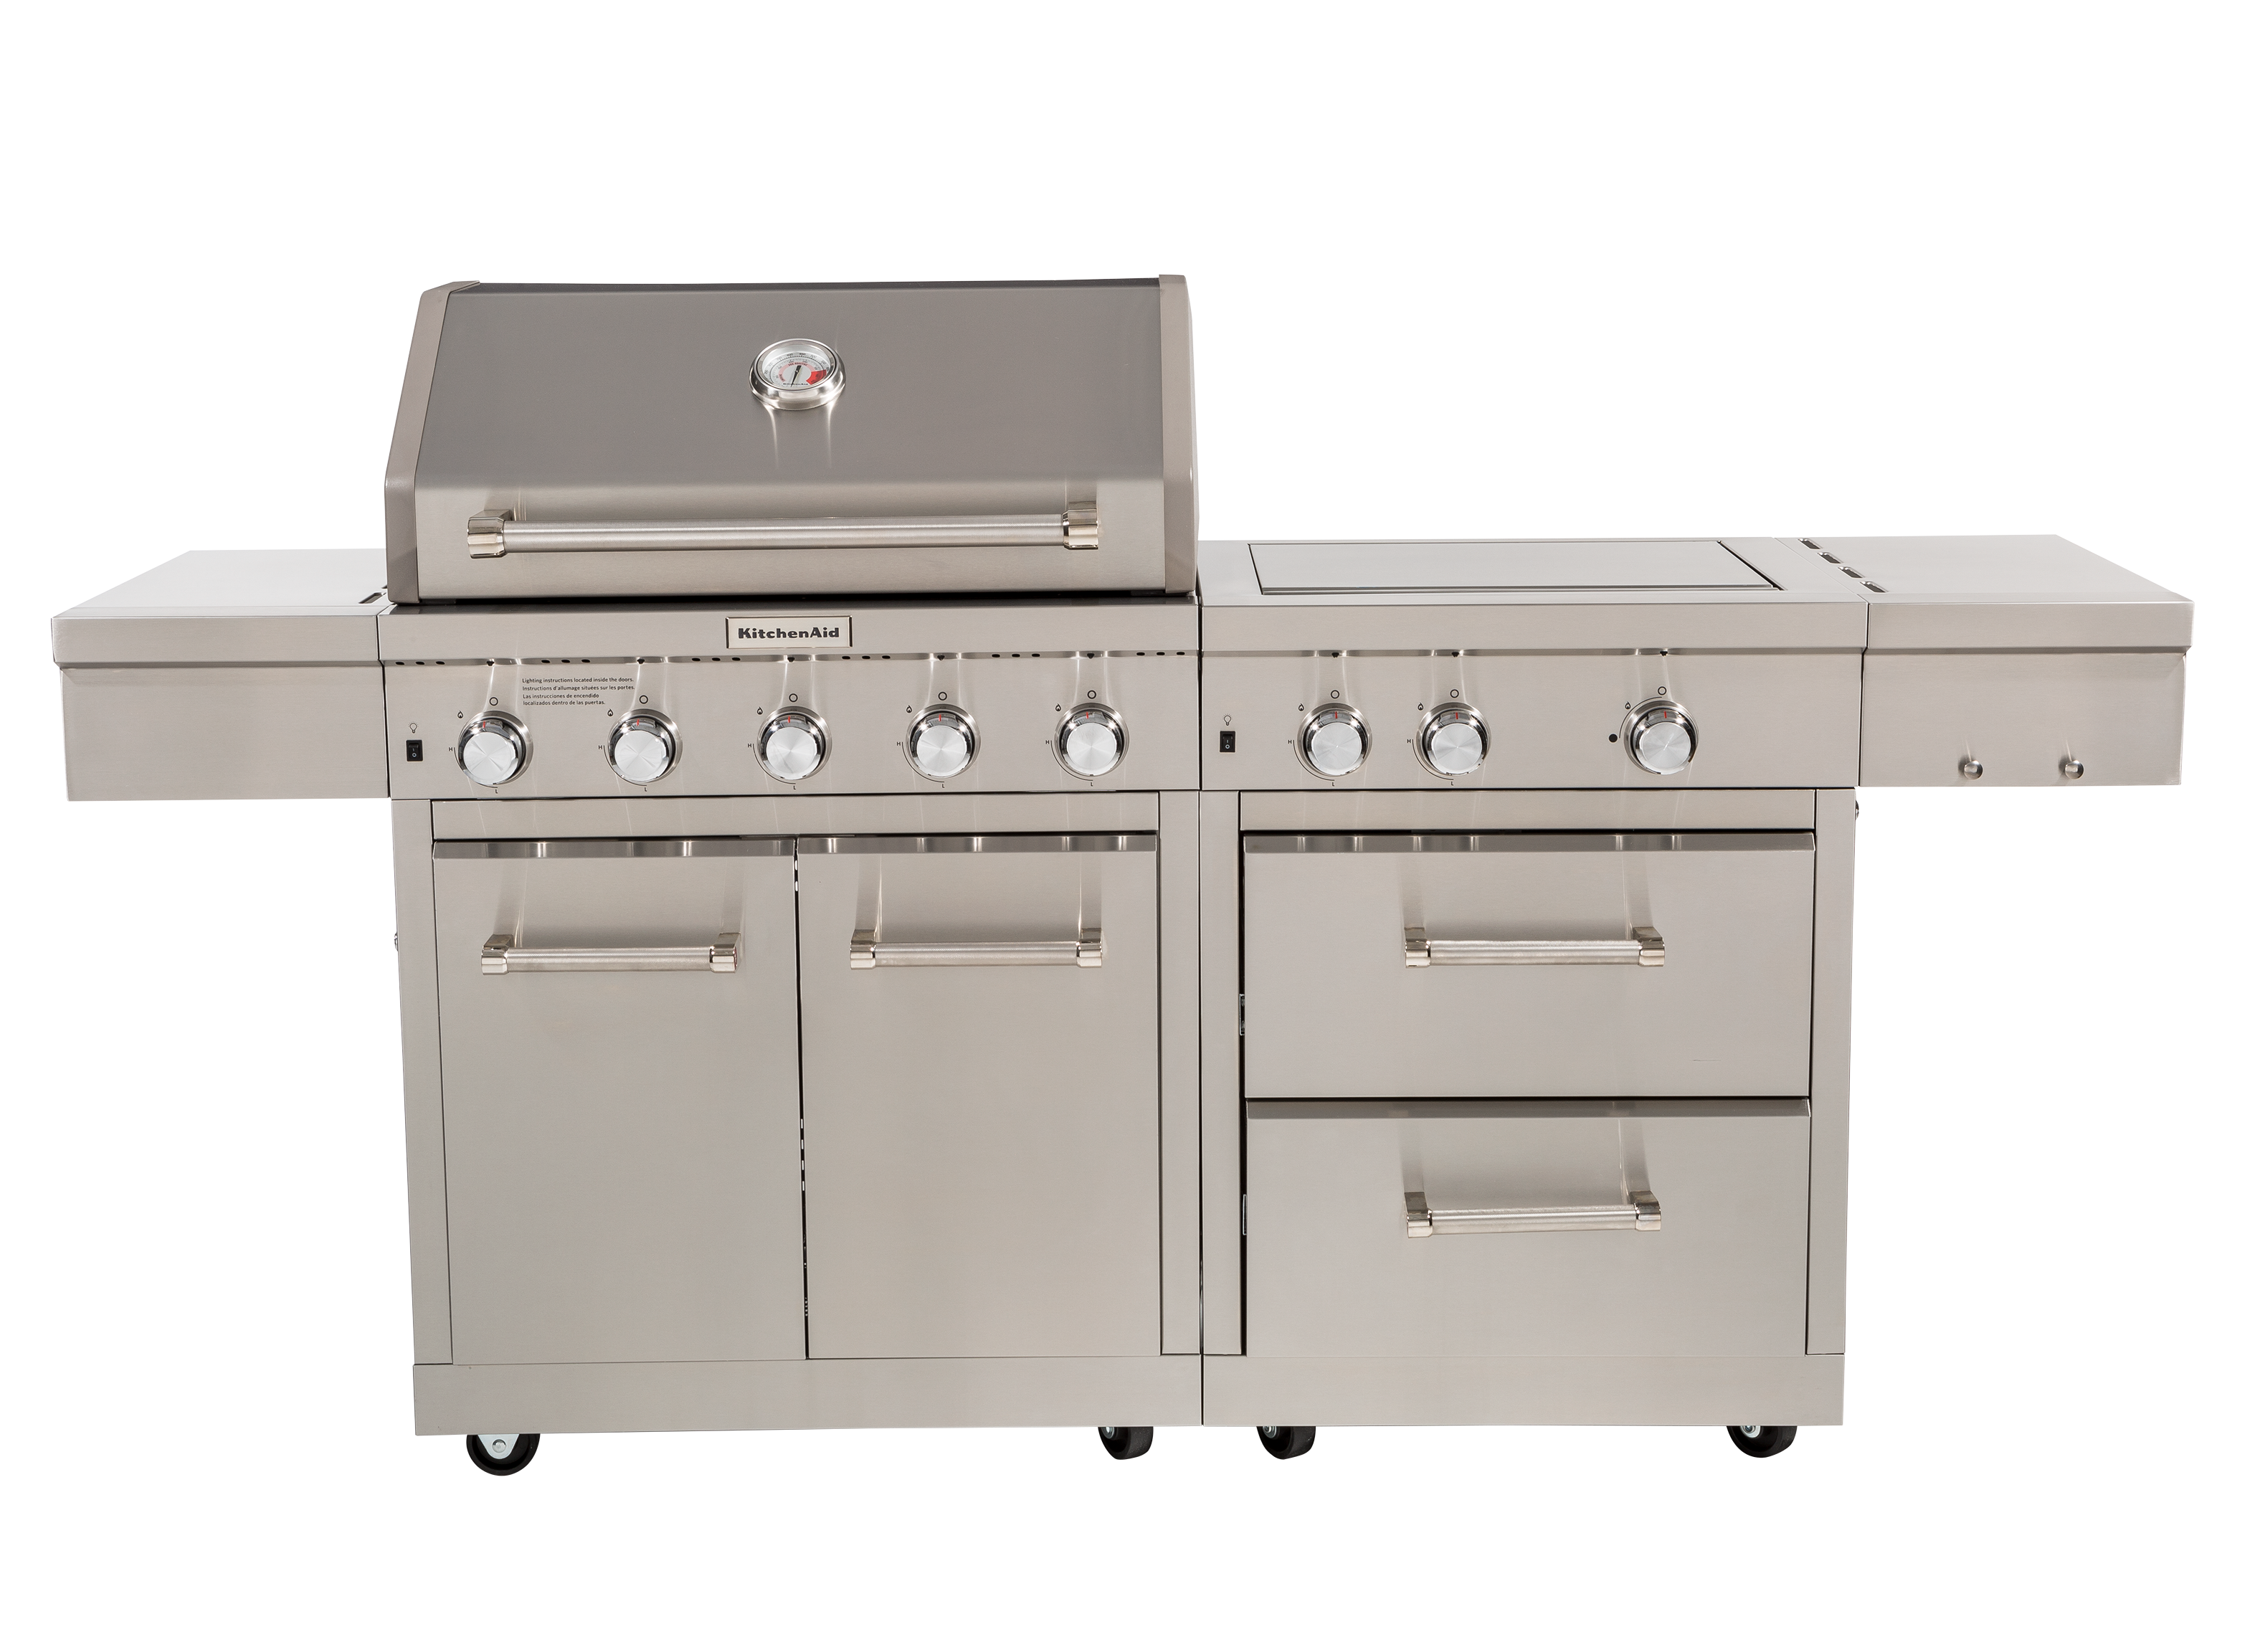 https://crdms.images.consumerreports.org/prod/products/cr/models/398250-midsize-gas-grills-room-for-18-to-28-burgers-kitchenaid-720-0990c-costco-10005595.png